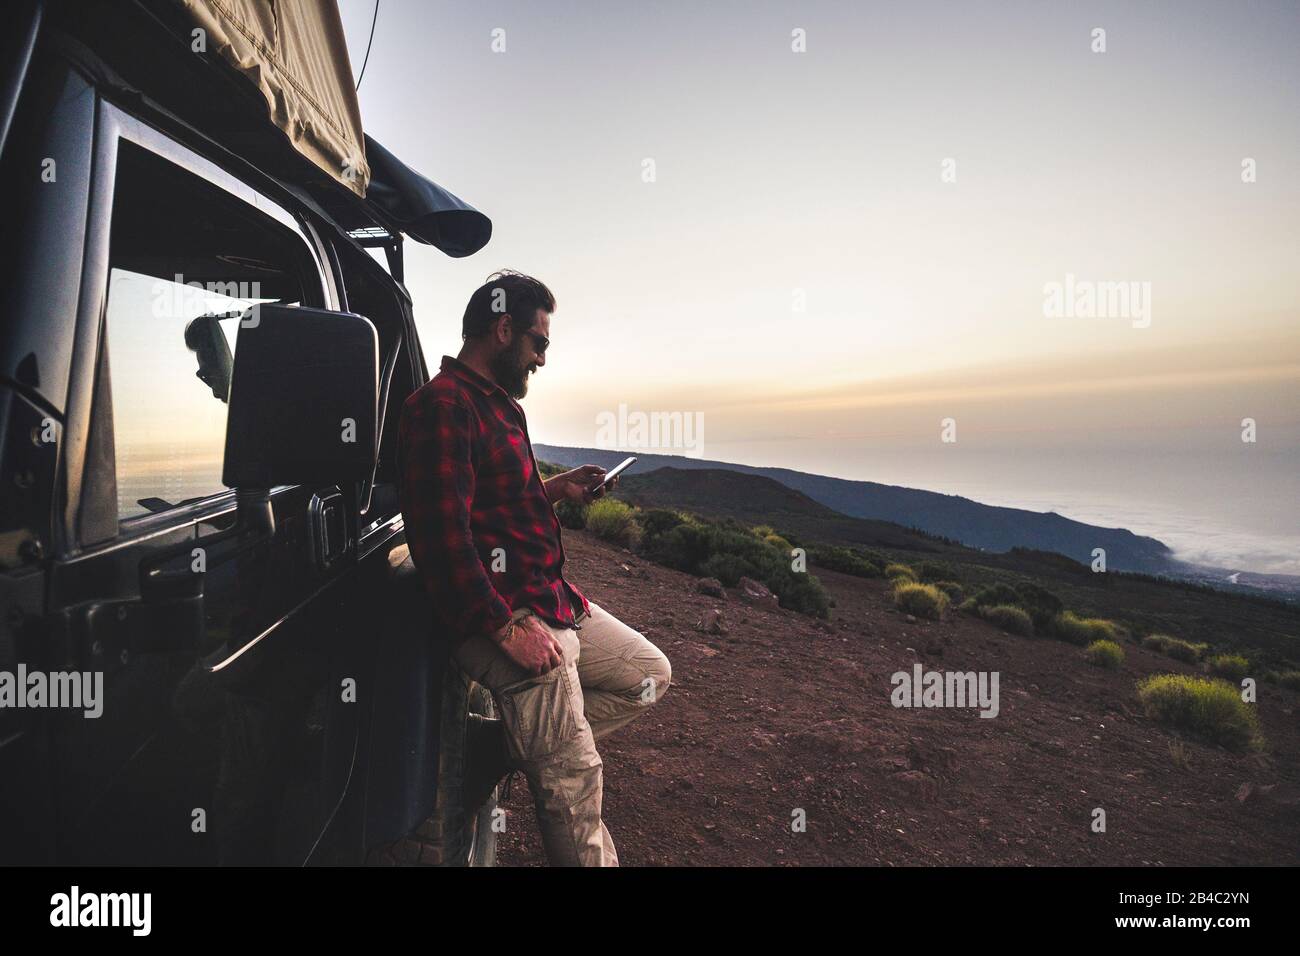 Adventure explorer traveler man use cellular phone with internet connection in wild mountain place during travel excursion with off road black car and tent on the roof - free people concept Stock Photo